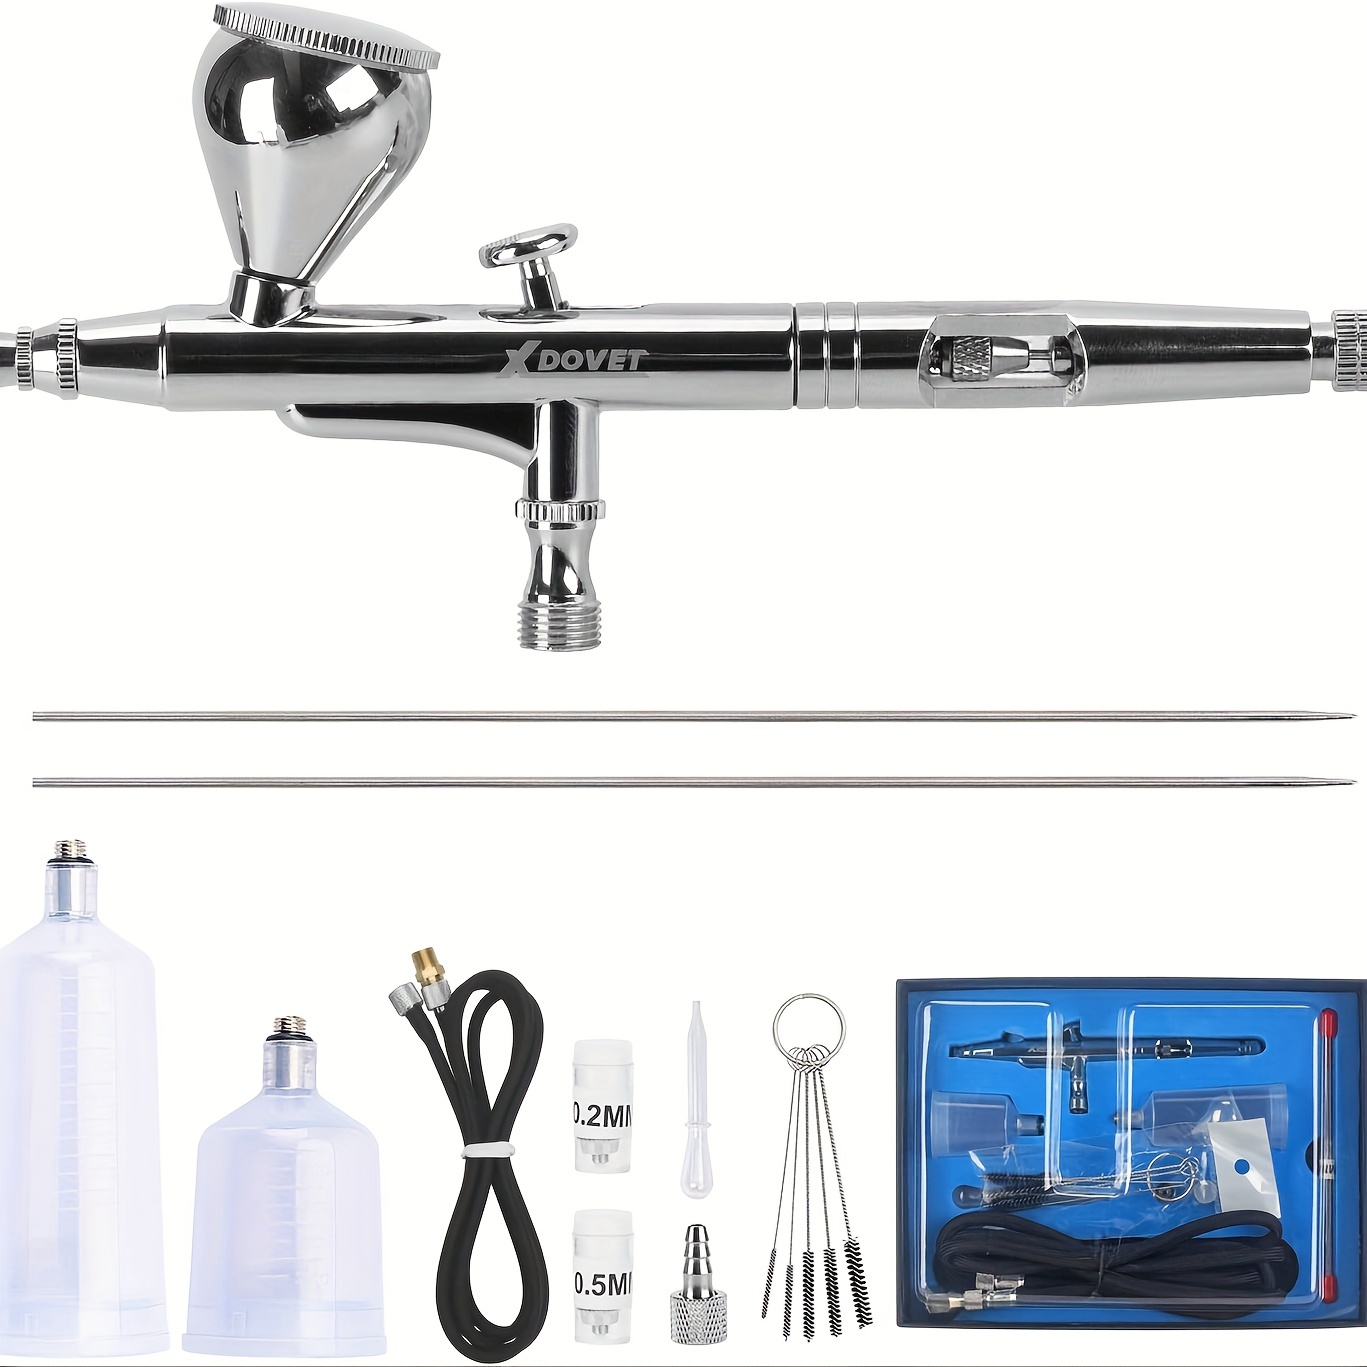 

Dual-action Airbrush Kit Air Brush Painting Set With 0.2mm/0.3mm/0.5mm Tool,7cc/20cc/40cc Paint Cup, Air Hose For Tattoo, Makeup, Nail, Model, Art Hobby - For Pro & Beginner